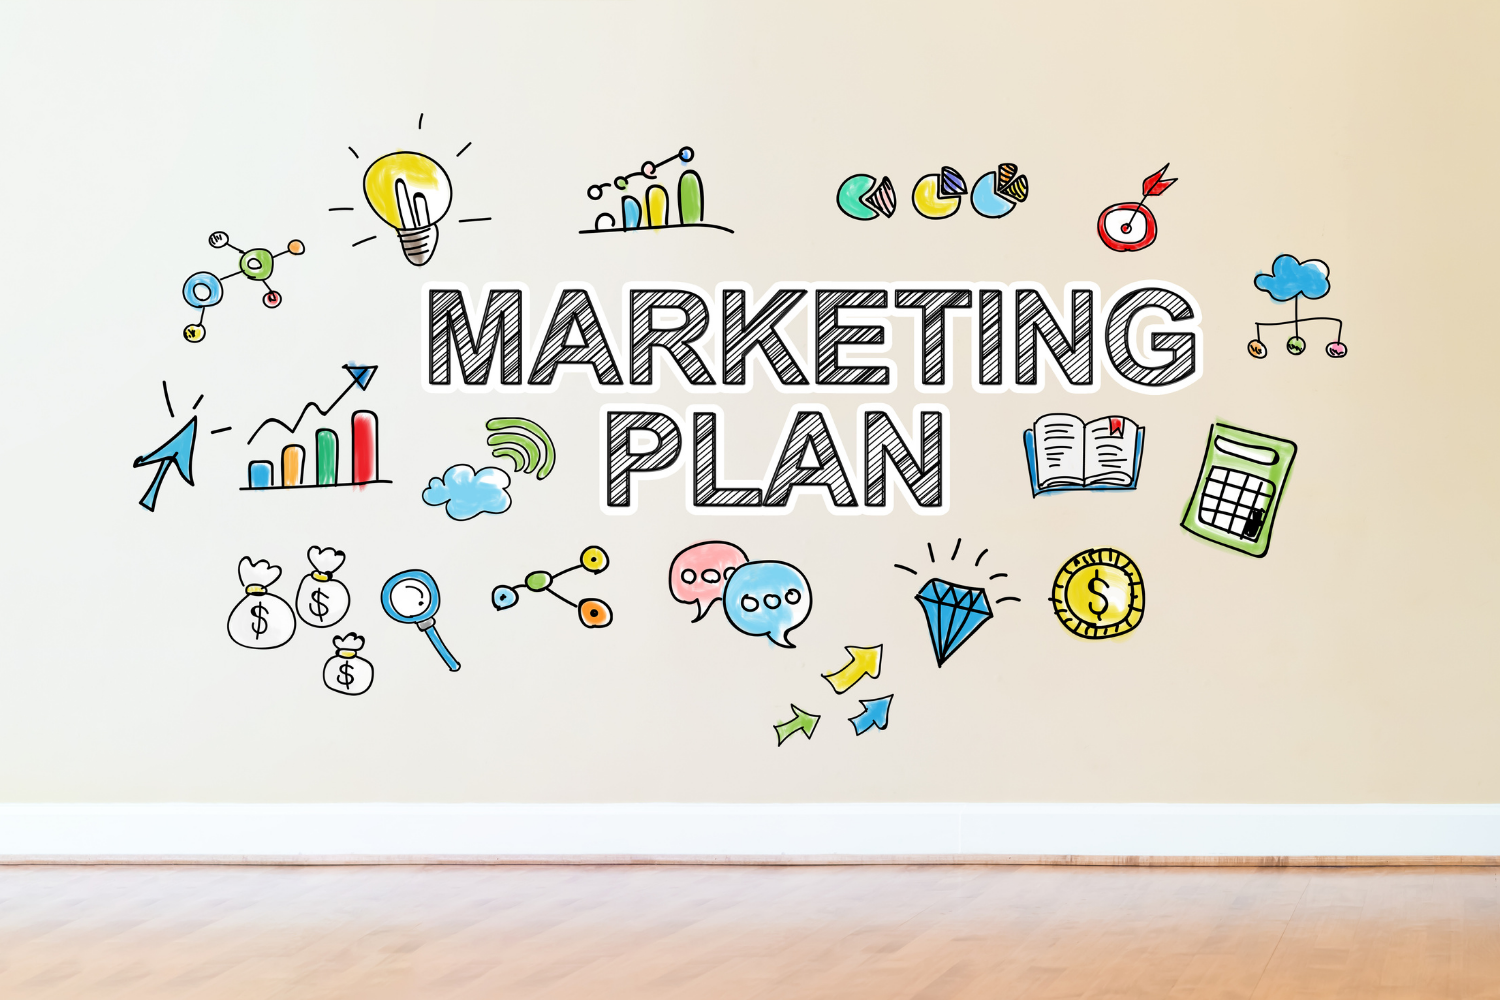 If I Made a One-Page Marketing Plan For a Small Business, What Should I Include?